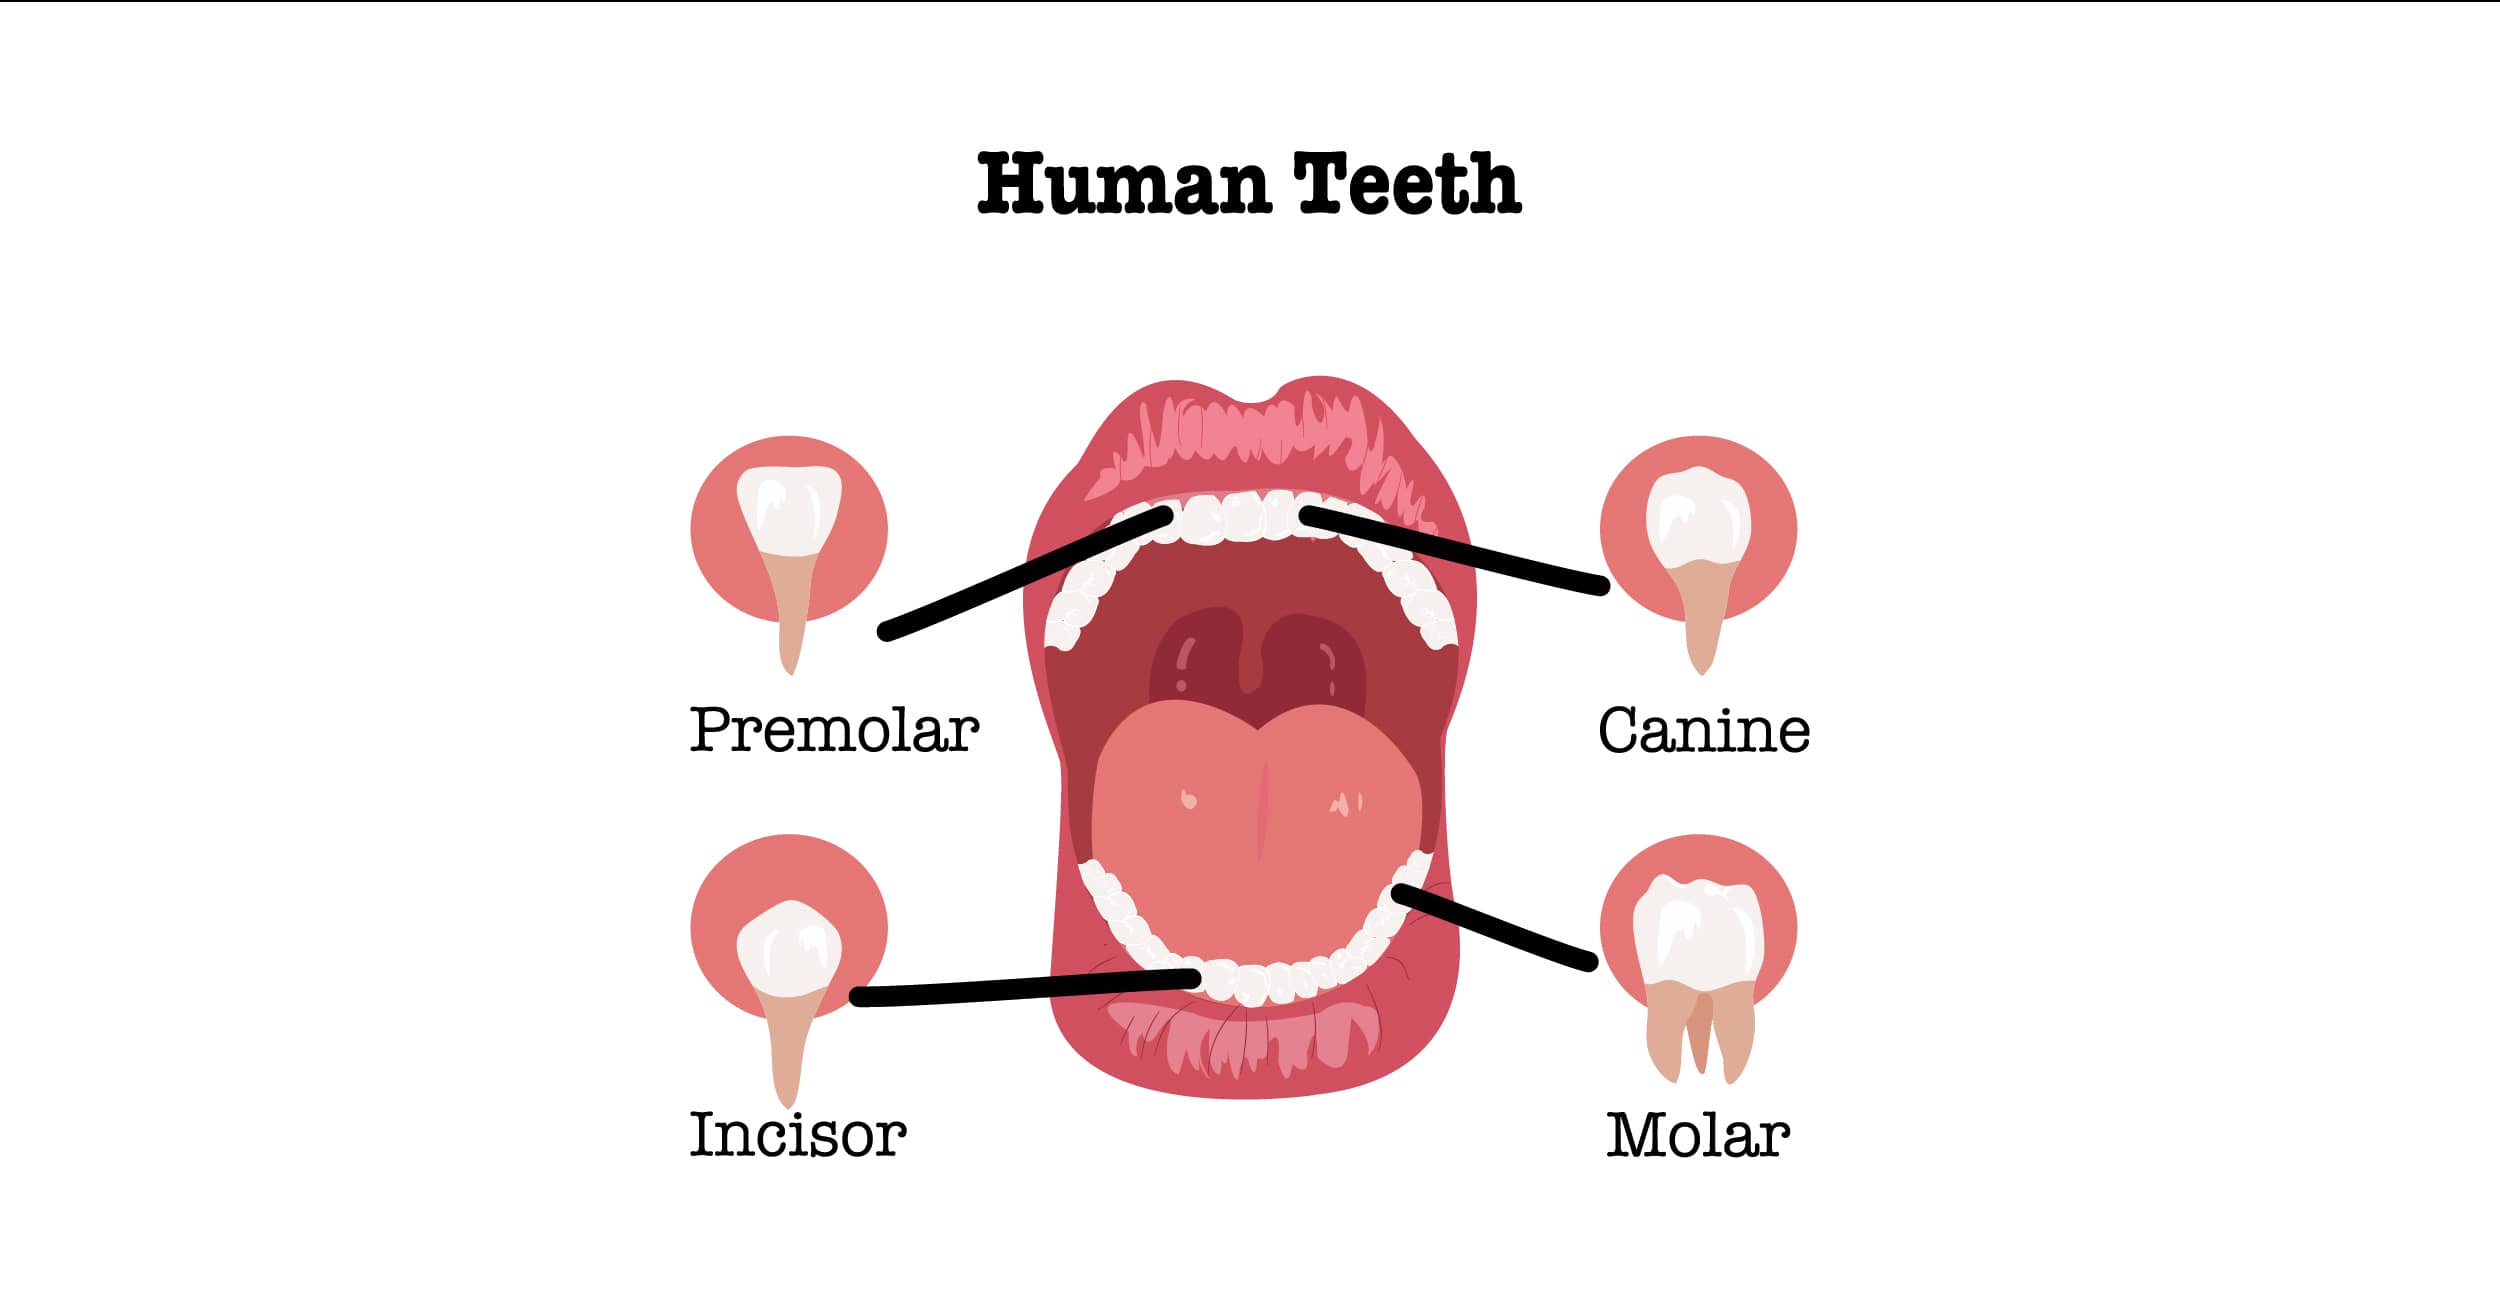 How Many Teeth Do Humans Have?